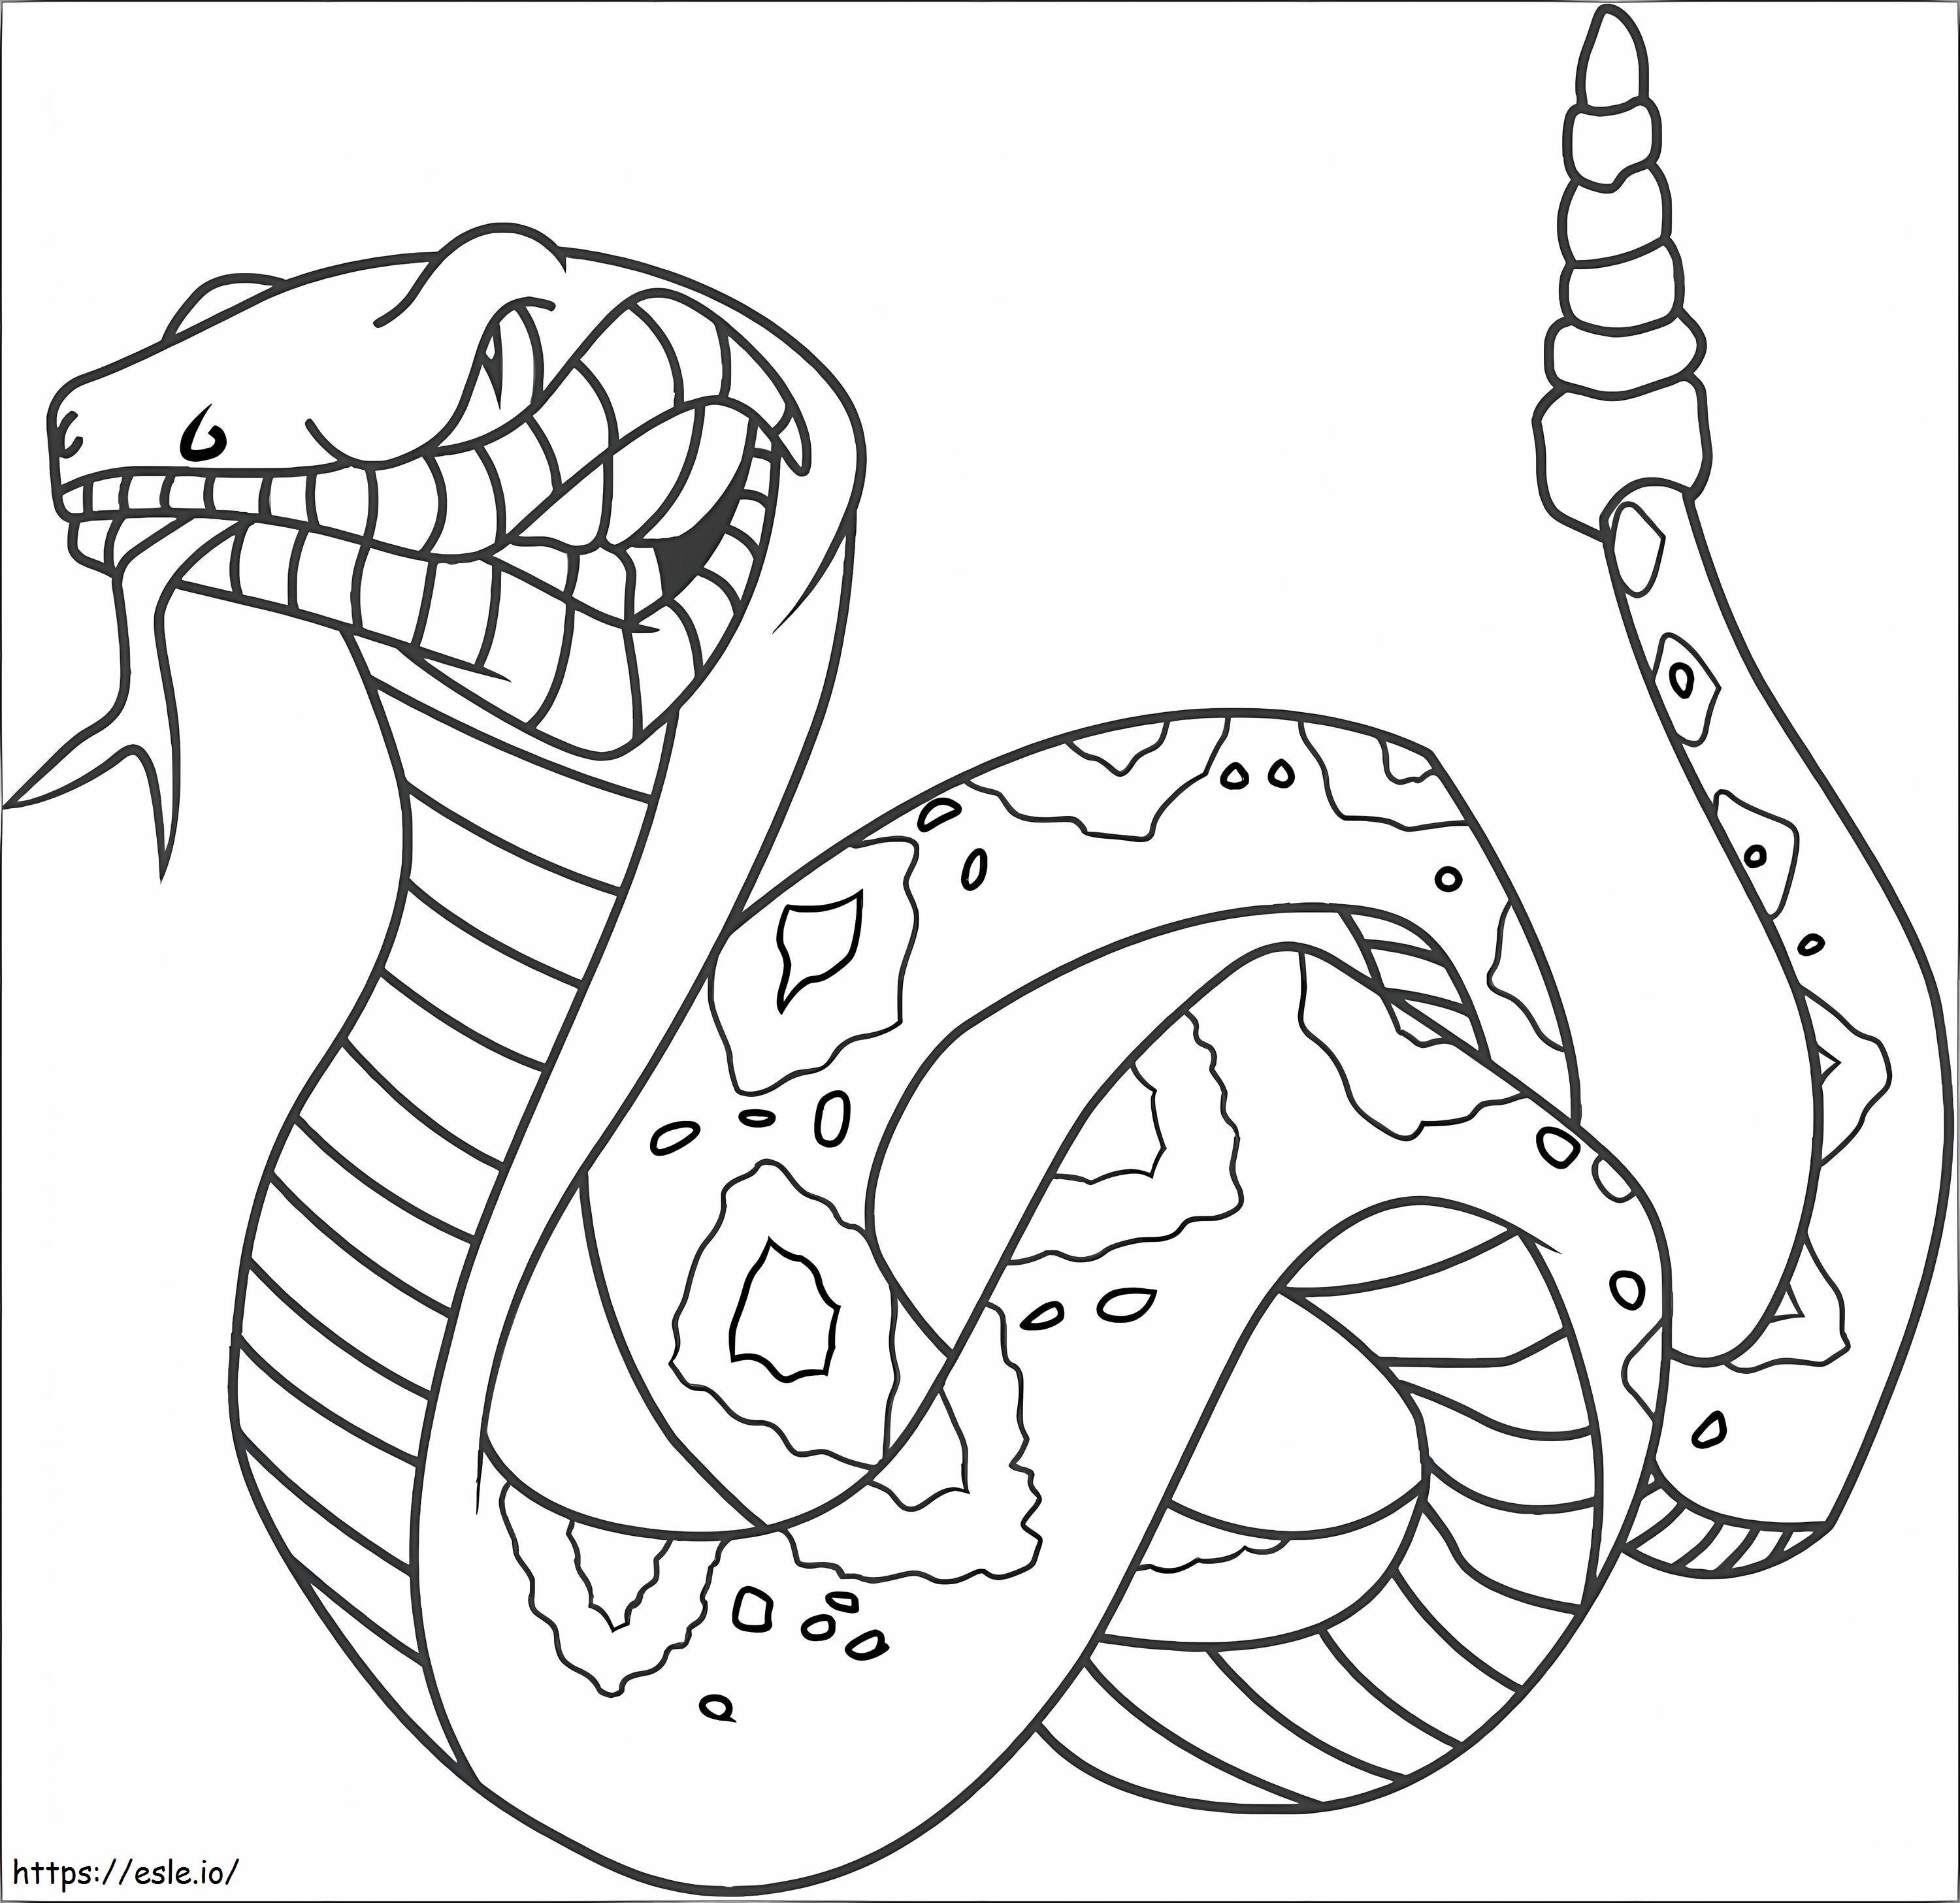 Great Snake coloring page